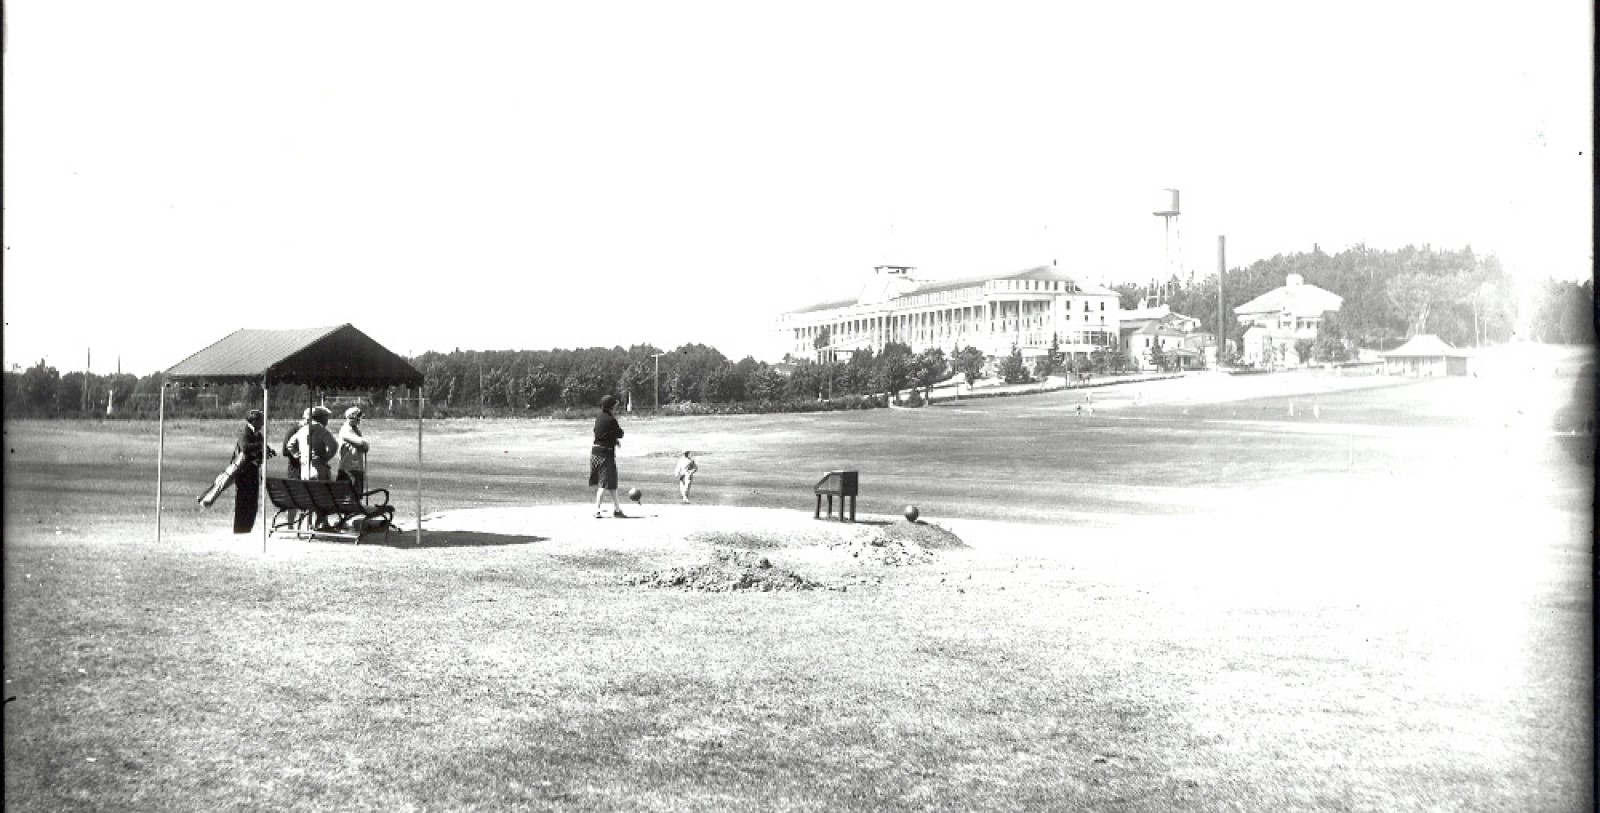 Historic Image of The Jewel Golf Course at the Grand Hotel, Mackinac Island, Michigan